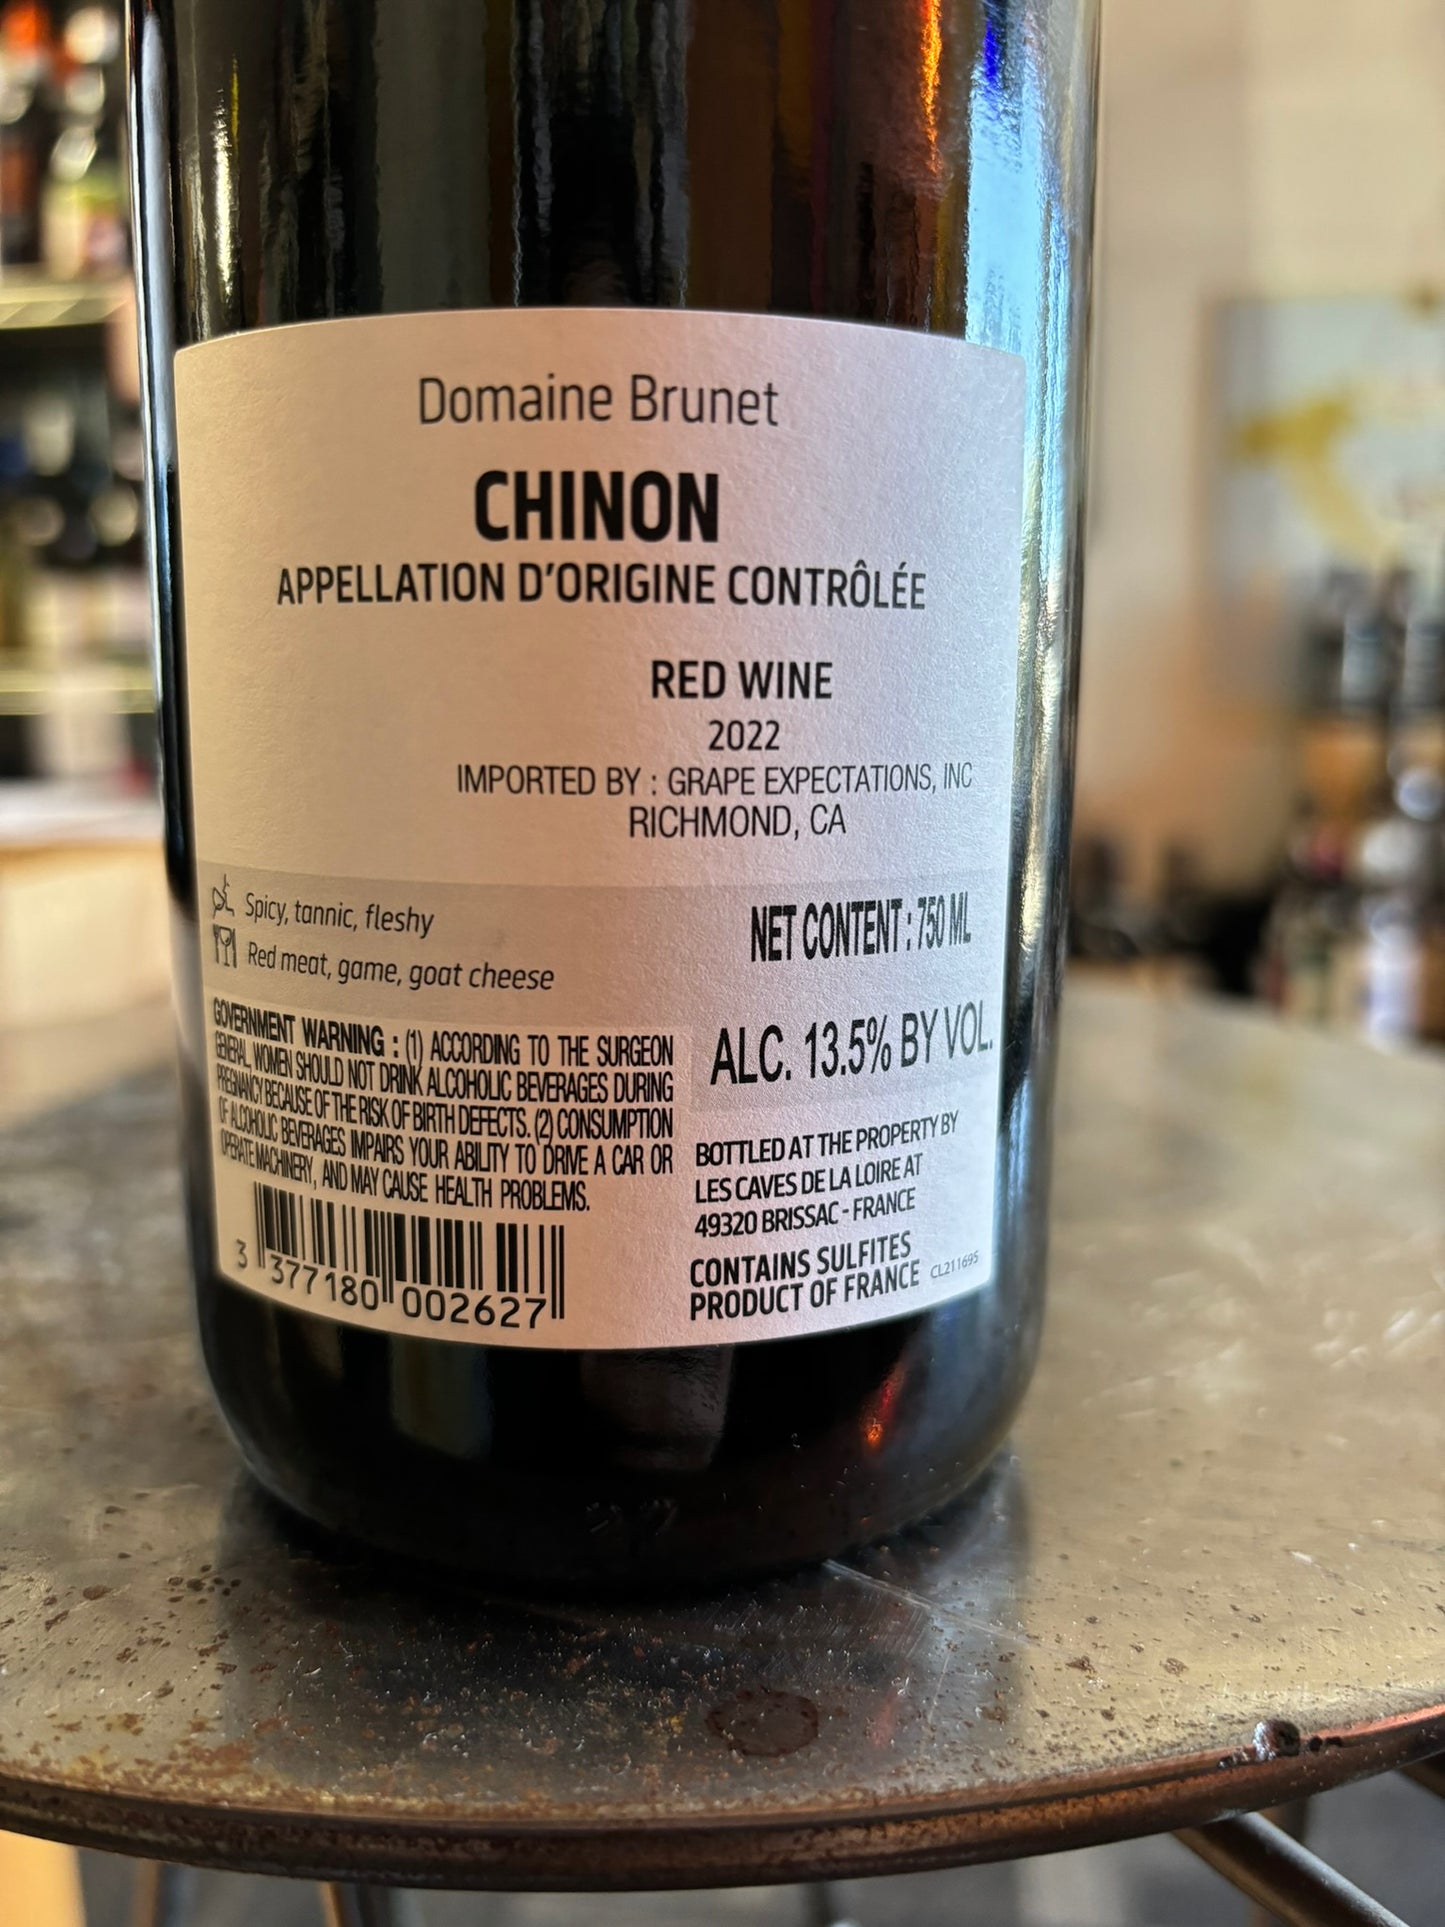 DOMAINE BRUNET 2022 Tradition Chinon (Loire, France)